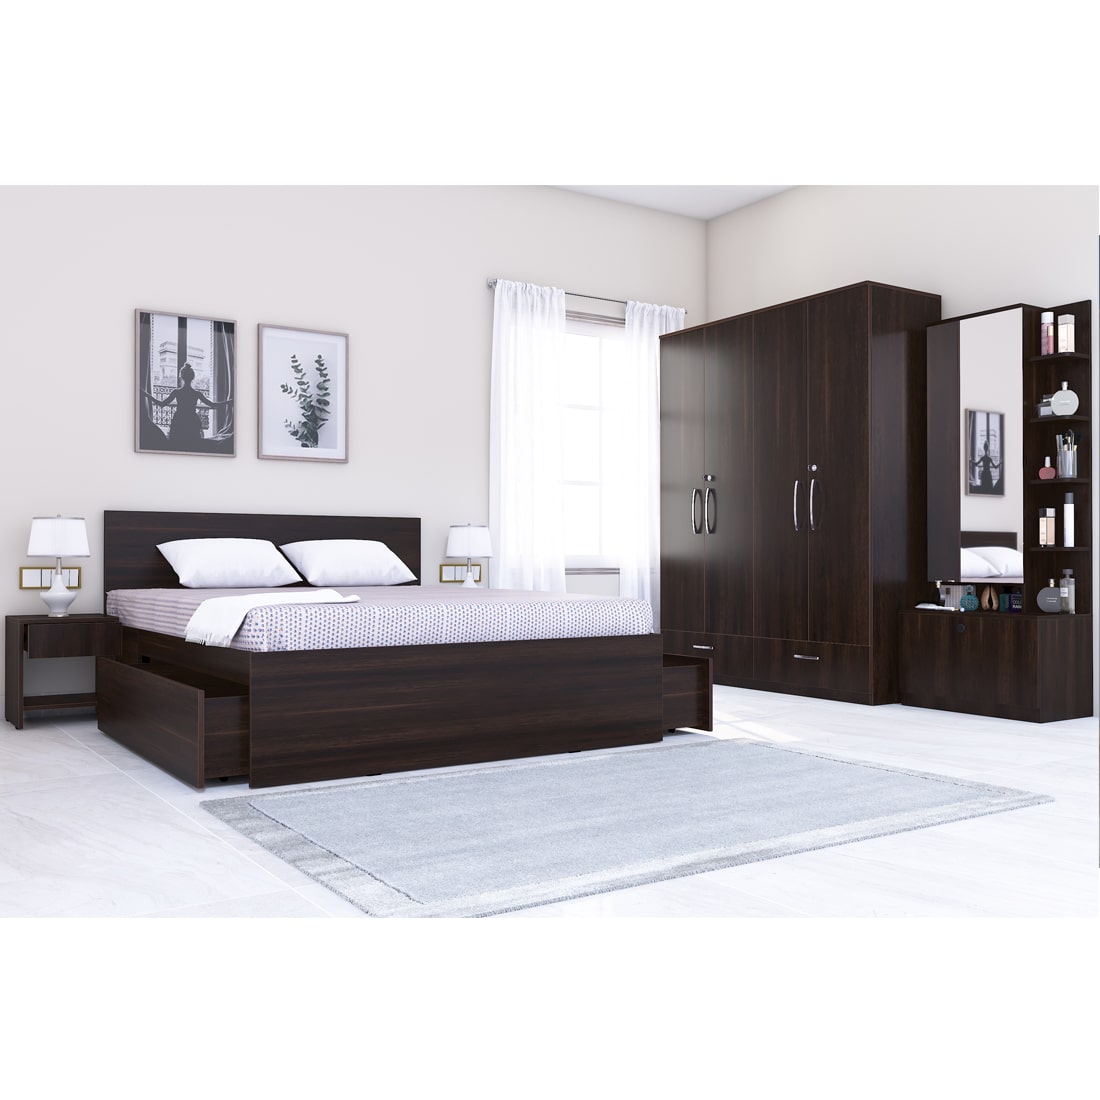 Sliding Wardrobe With Bed And Dressing Table in Dandeli at best price by  Shree Ganesh Furniture - Justdial